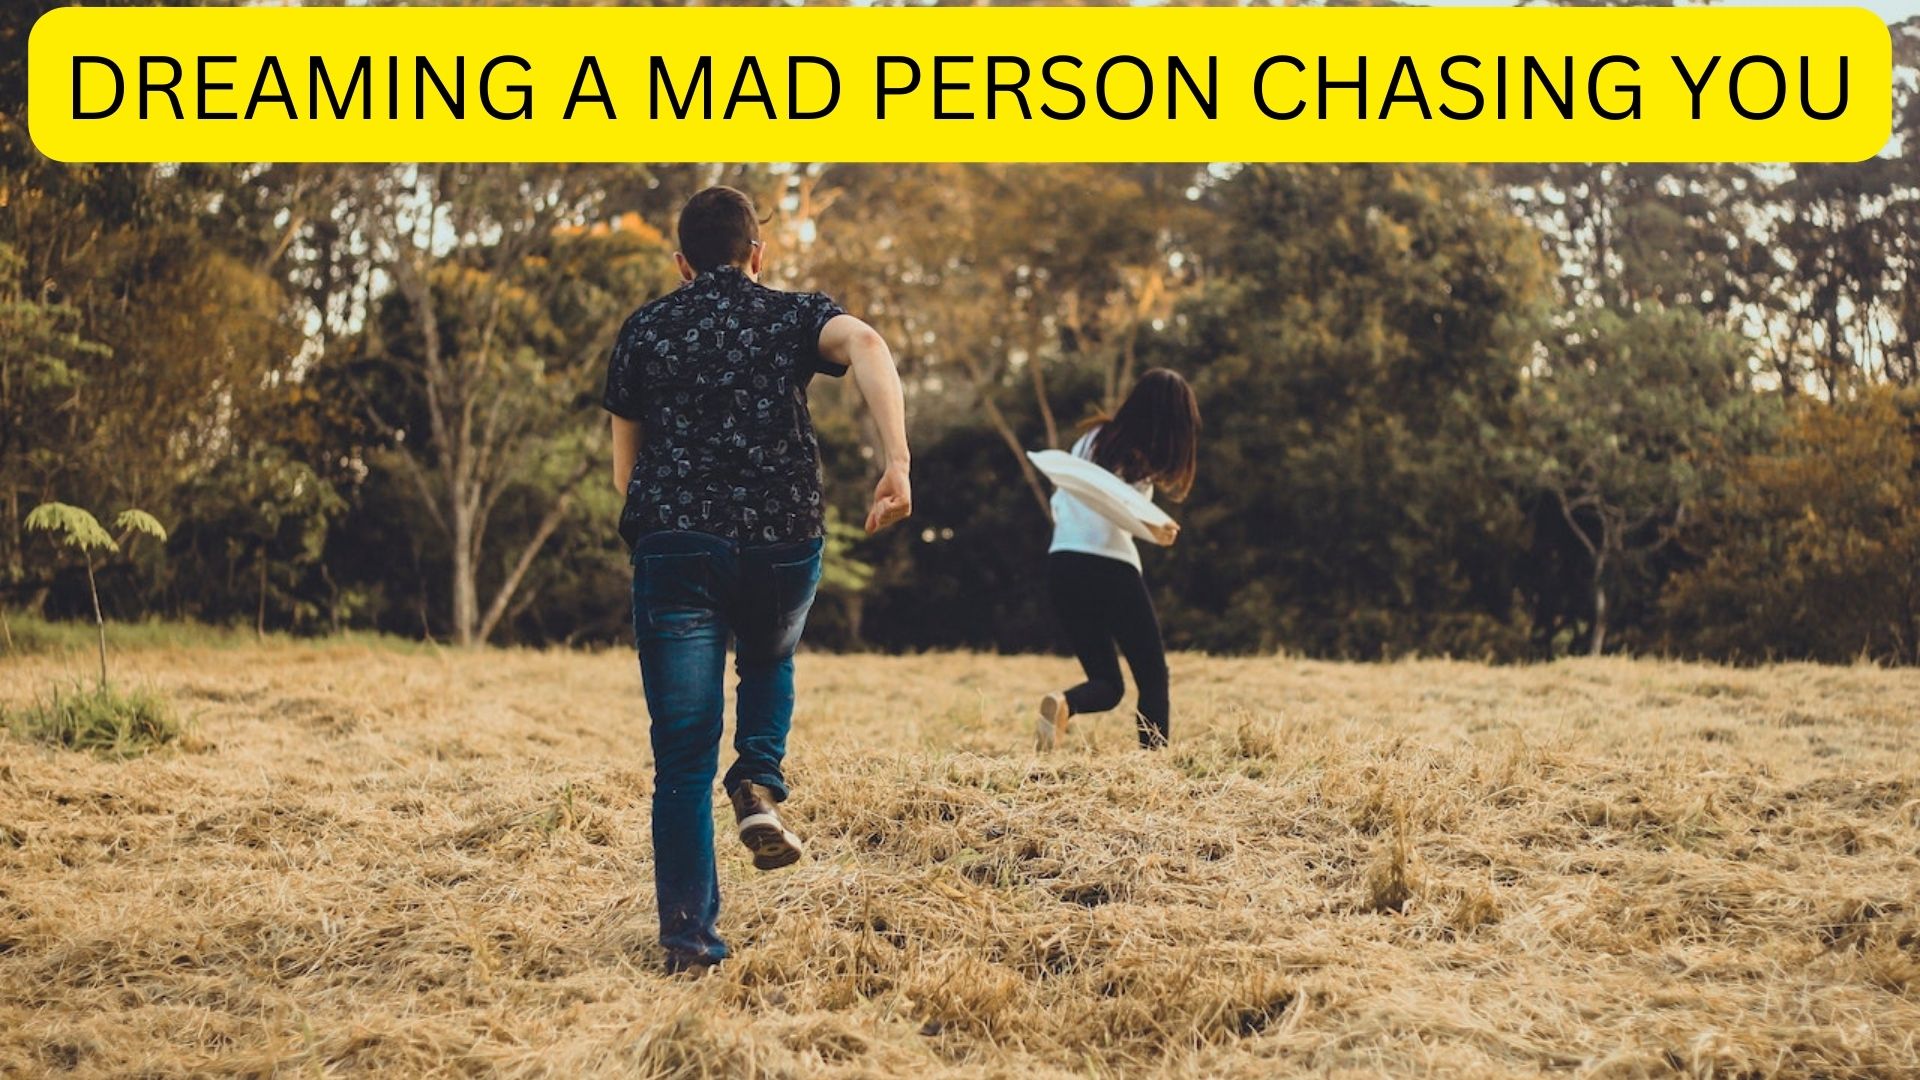 Dreaming A Mad Person Chasing You - Reflection Of Your Inner Demons